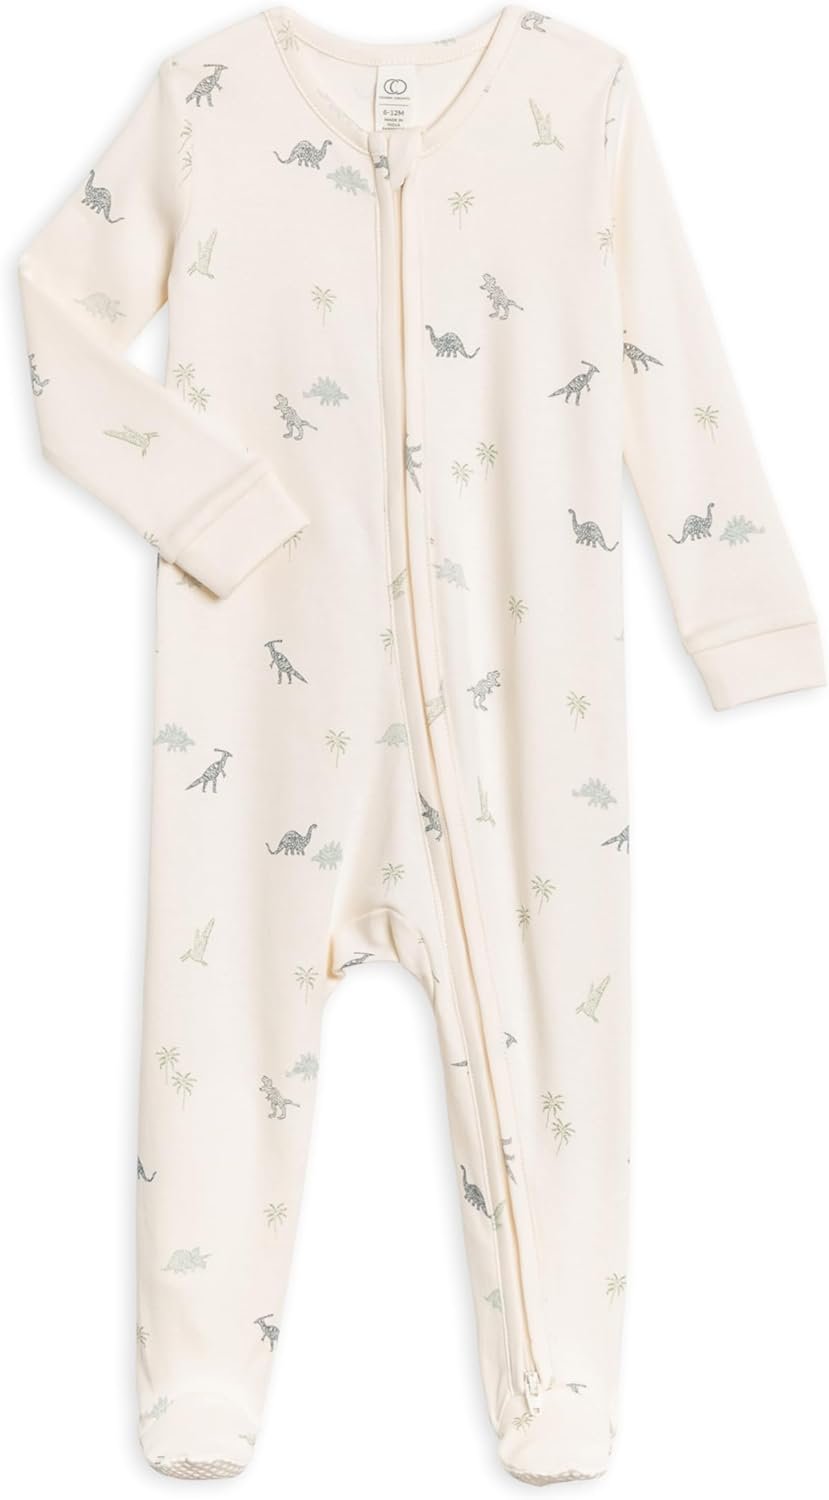 Colored Organics Baby Organic Cotton Peyton Zip Up Footed Sleeper Review